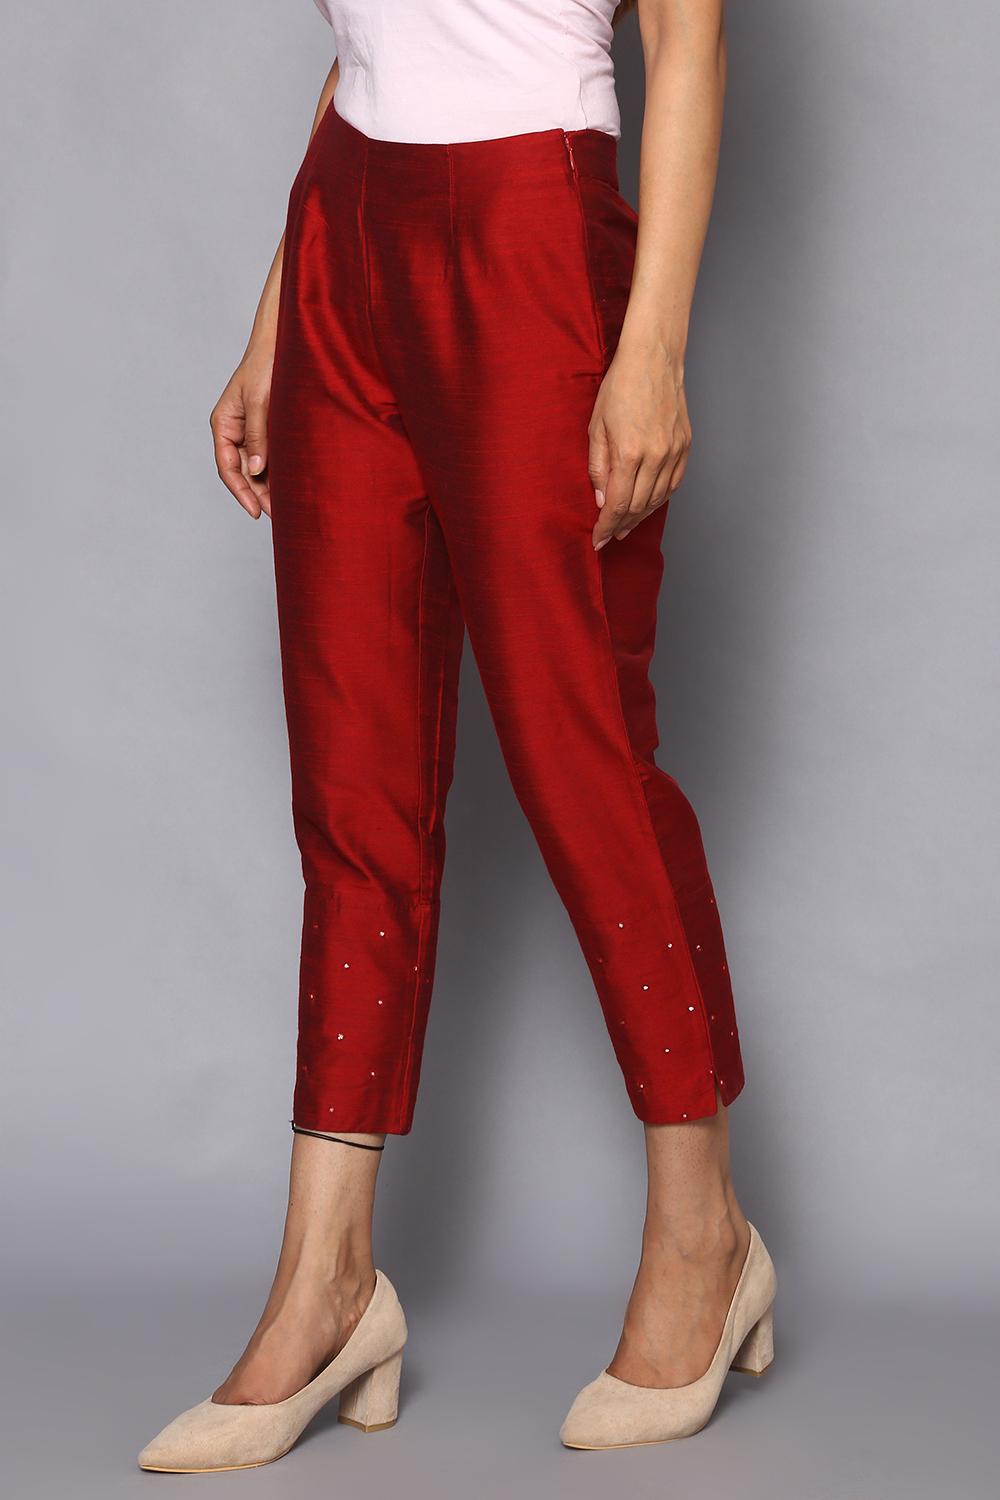 Buy Online Maroon Poly Viscose Pants for Women & Girls at Best Prices ...